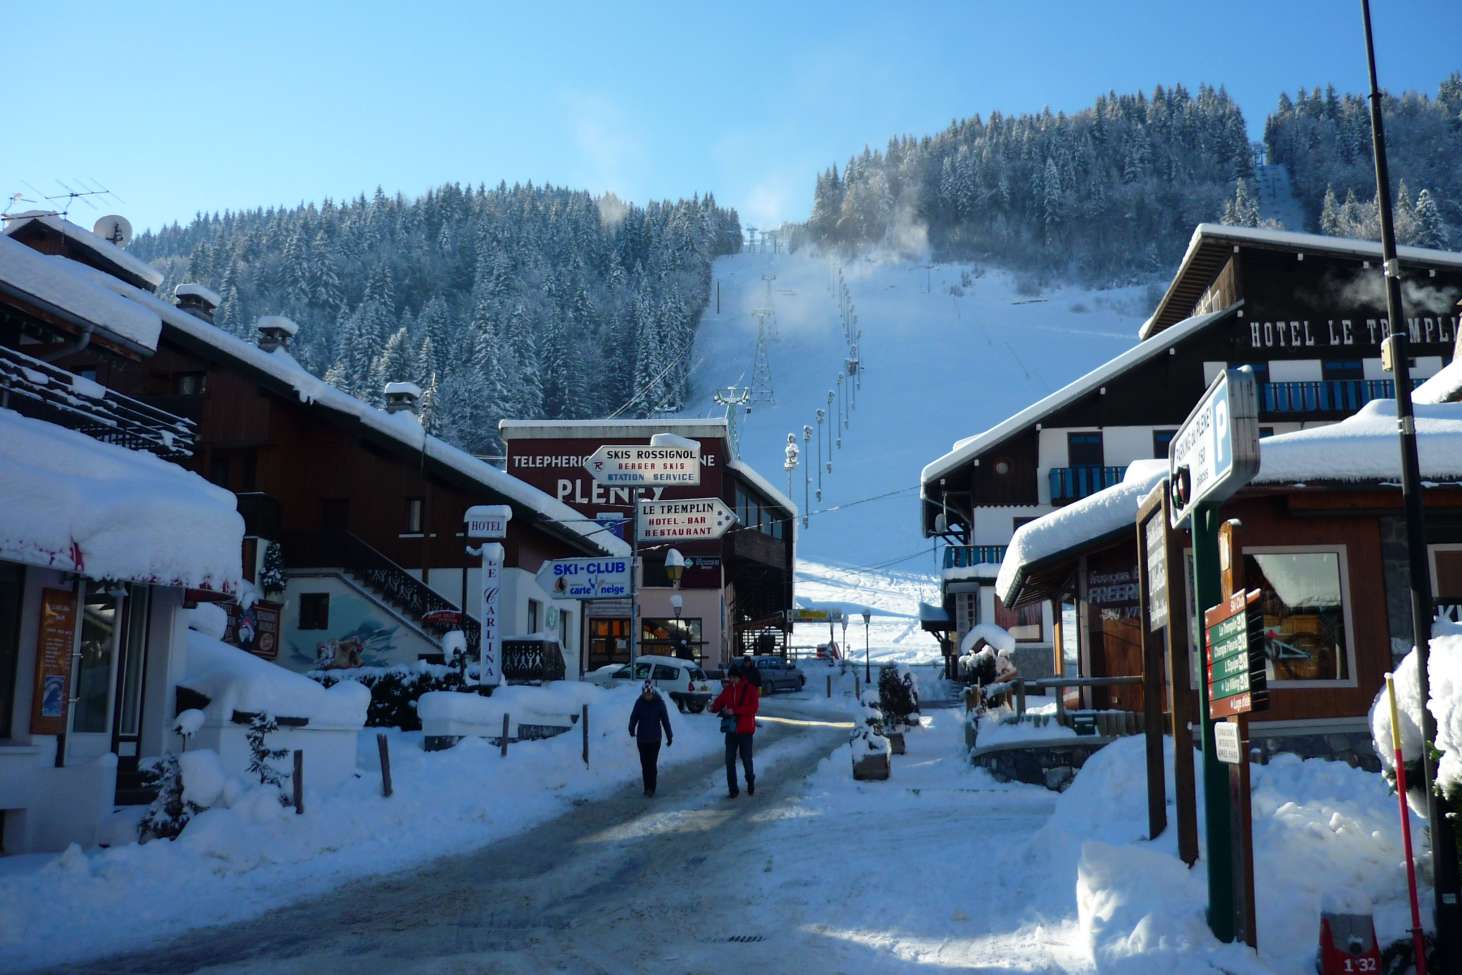 The Pleney bubble lift is the main gateway between Morzine and Les Gets